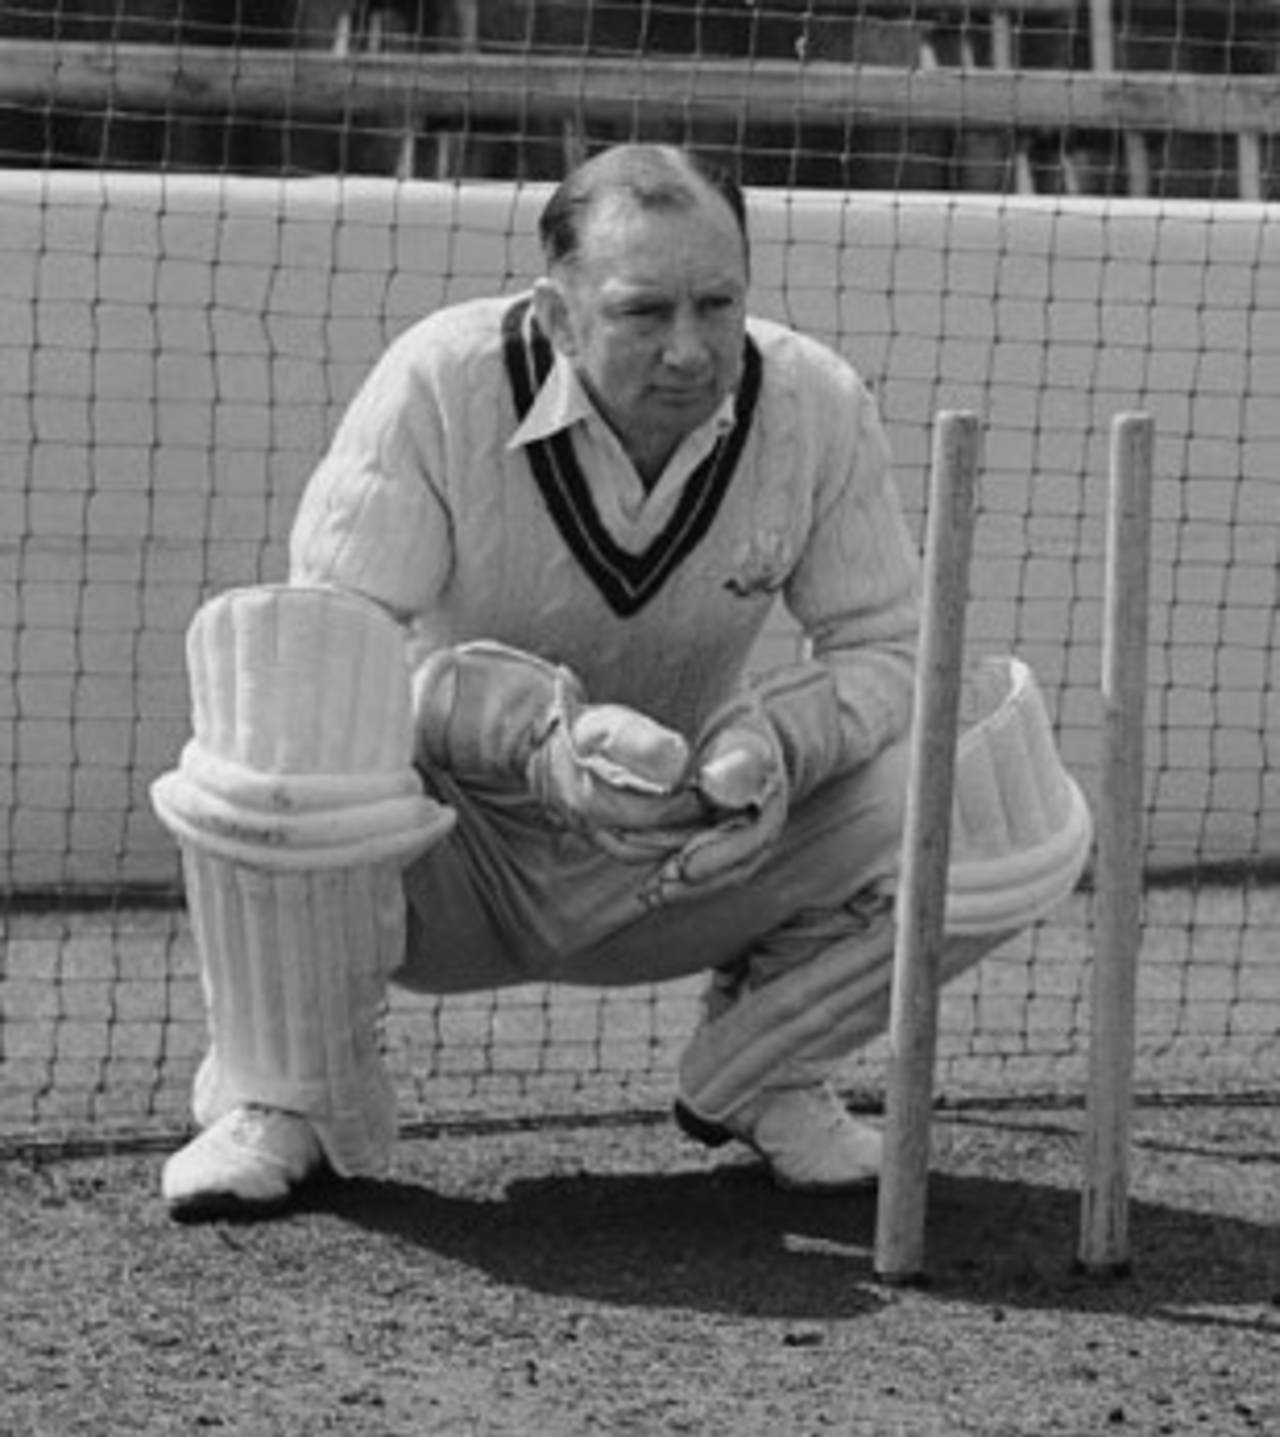 Arthur McIntyre in the nets at The Oval, May 16, 1956